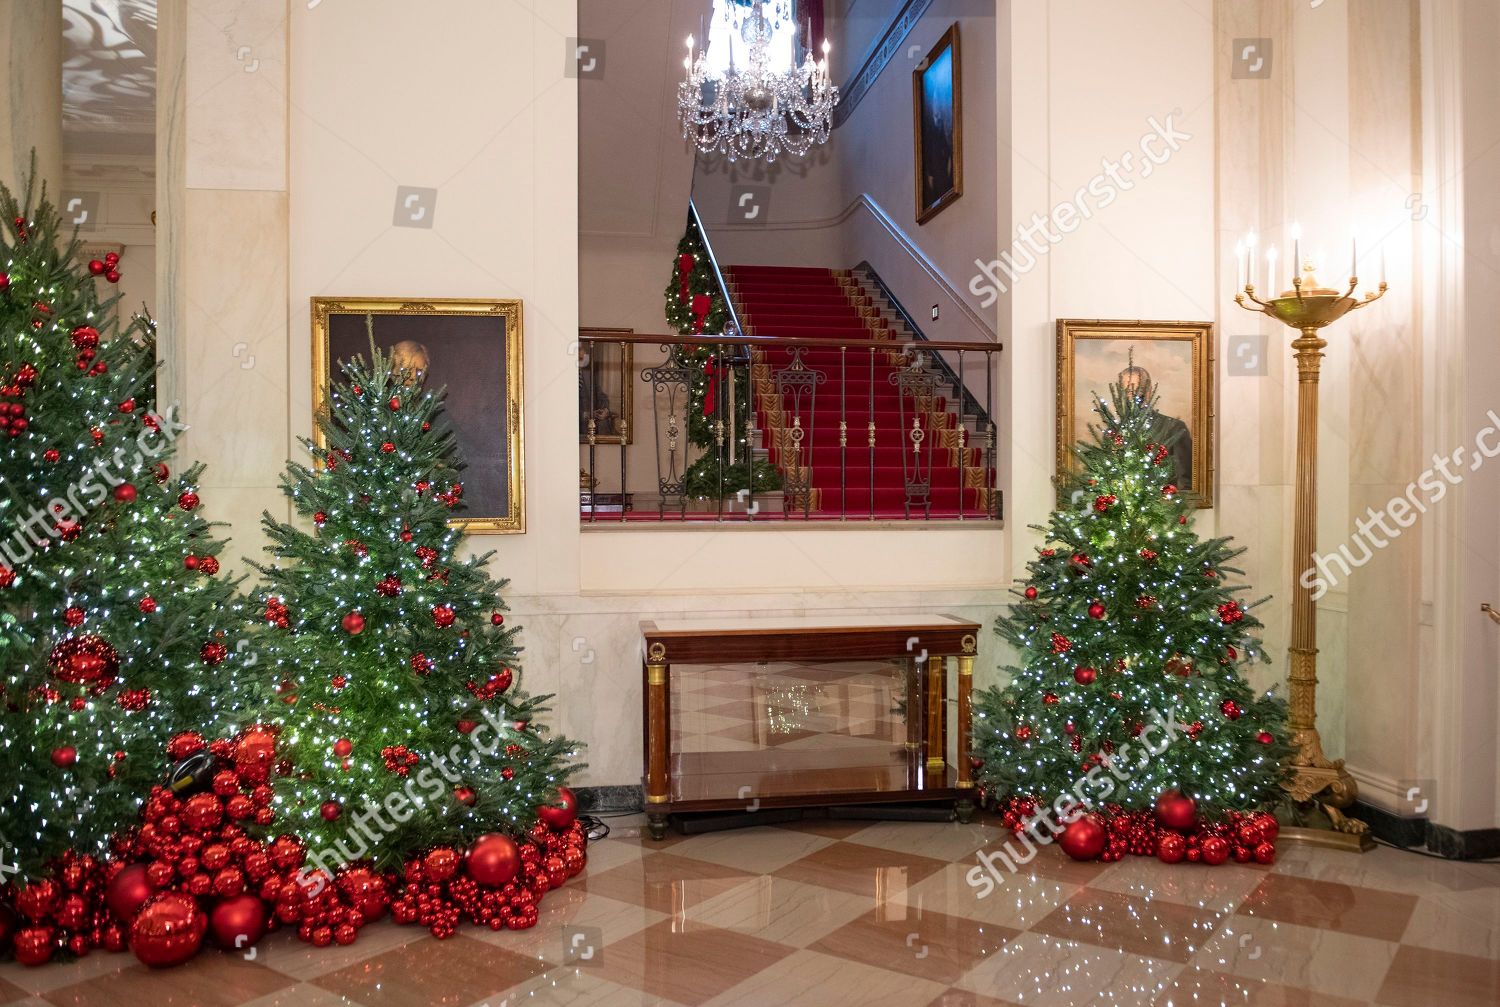 2019 White House Christmas  decorations  Editorial Stock 